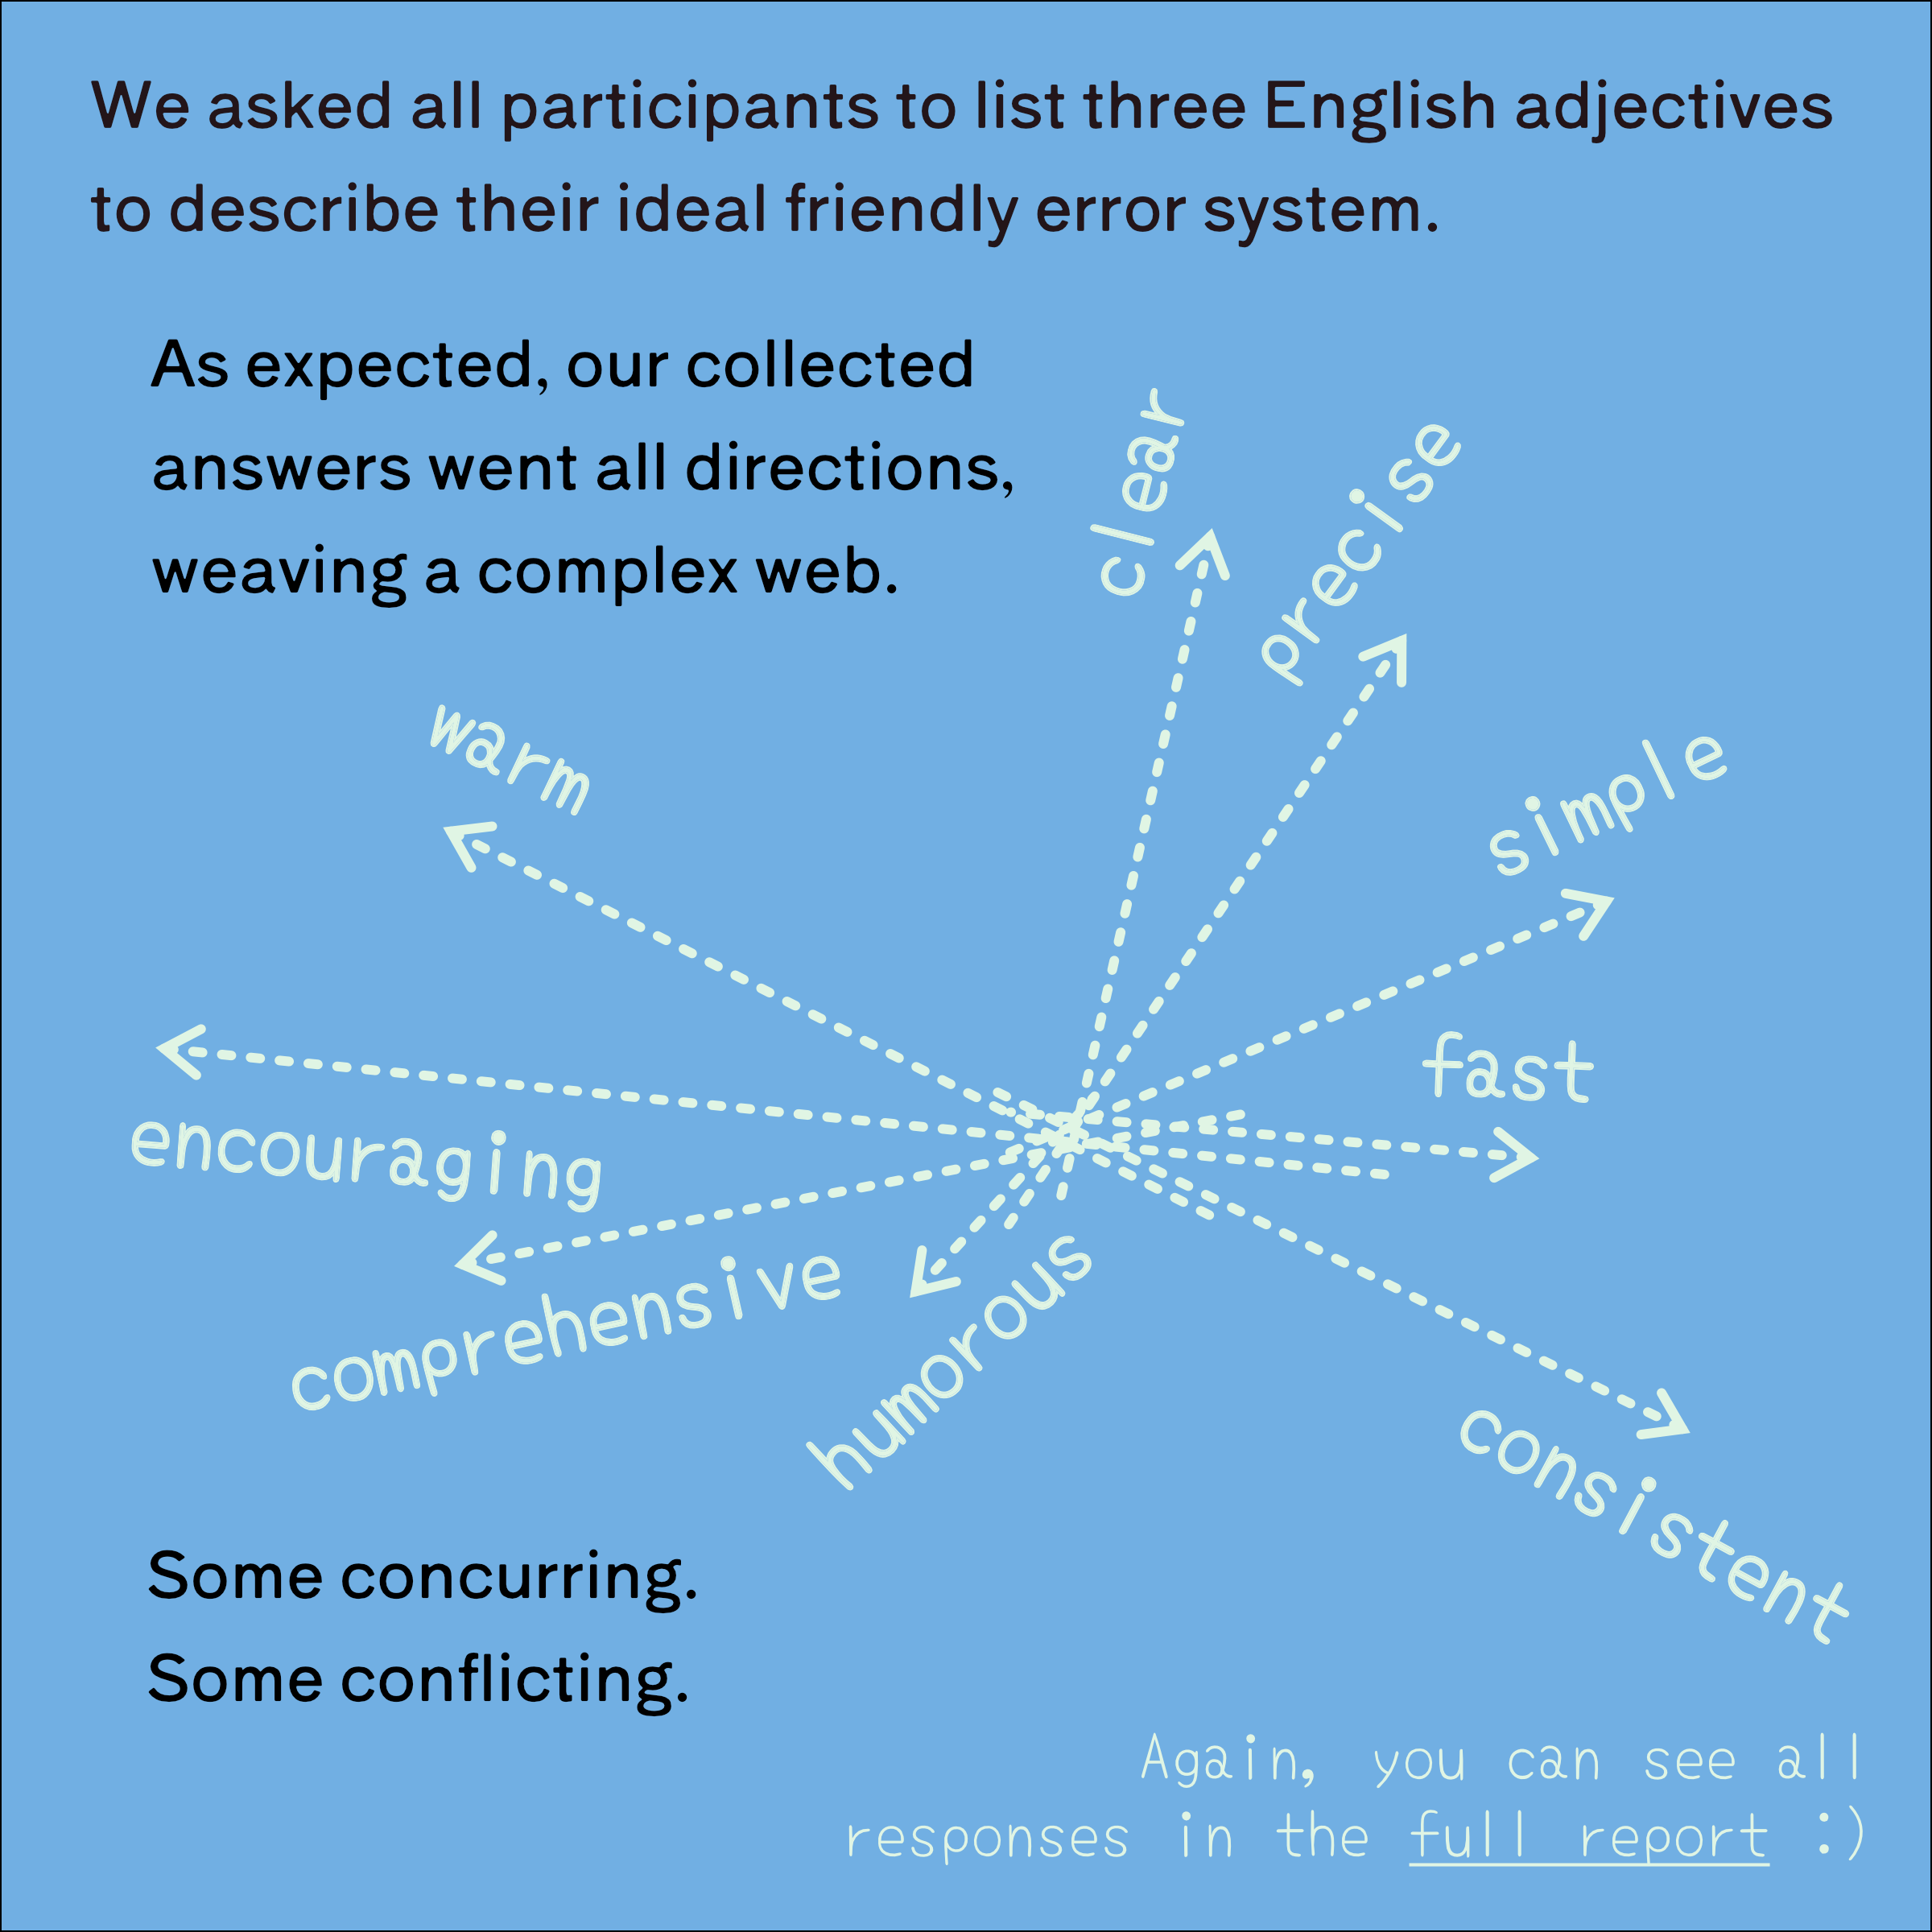 We asked all participants to list three English adjectives to describe their ideal friendly error system. As expected, the collected answers wove a complex web! Some concurring. Some conflicting. You can read all responses in this section of the report: https://observablehq.com/@almchung/2022-p5jsfes-survey#cell-649